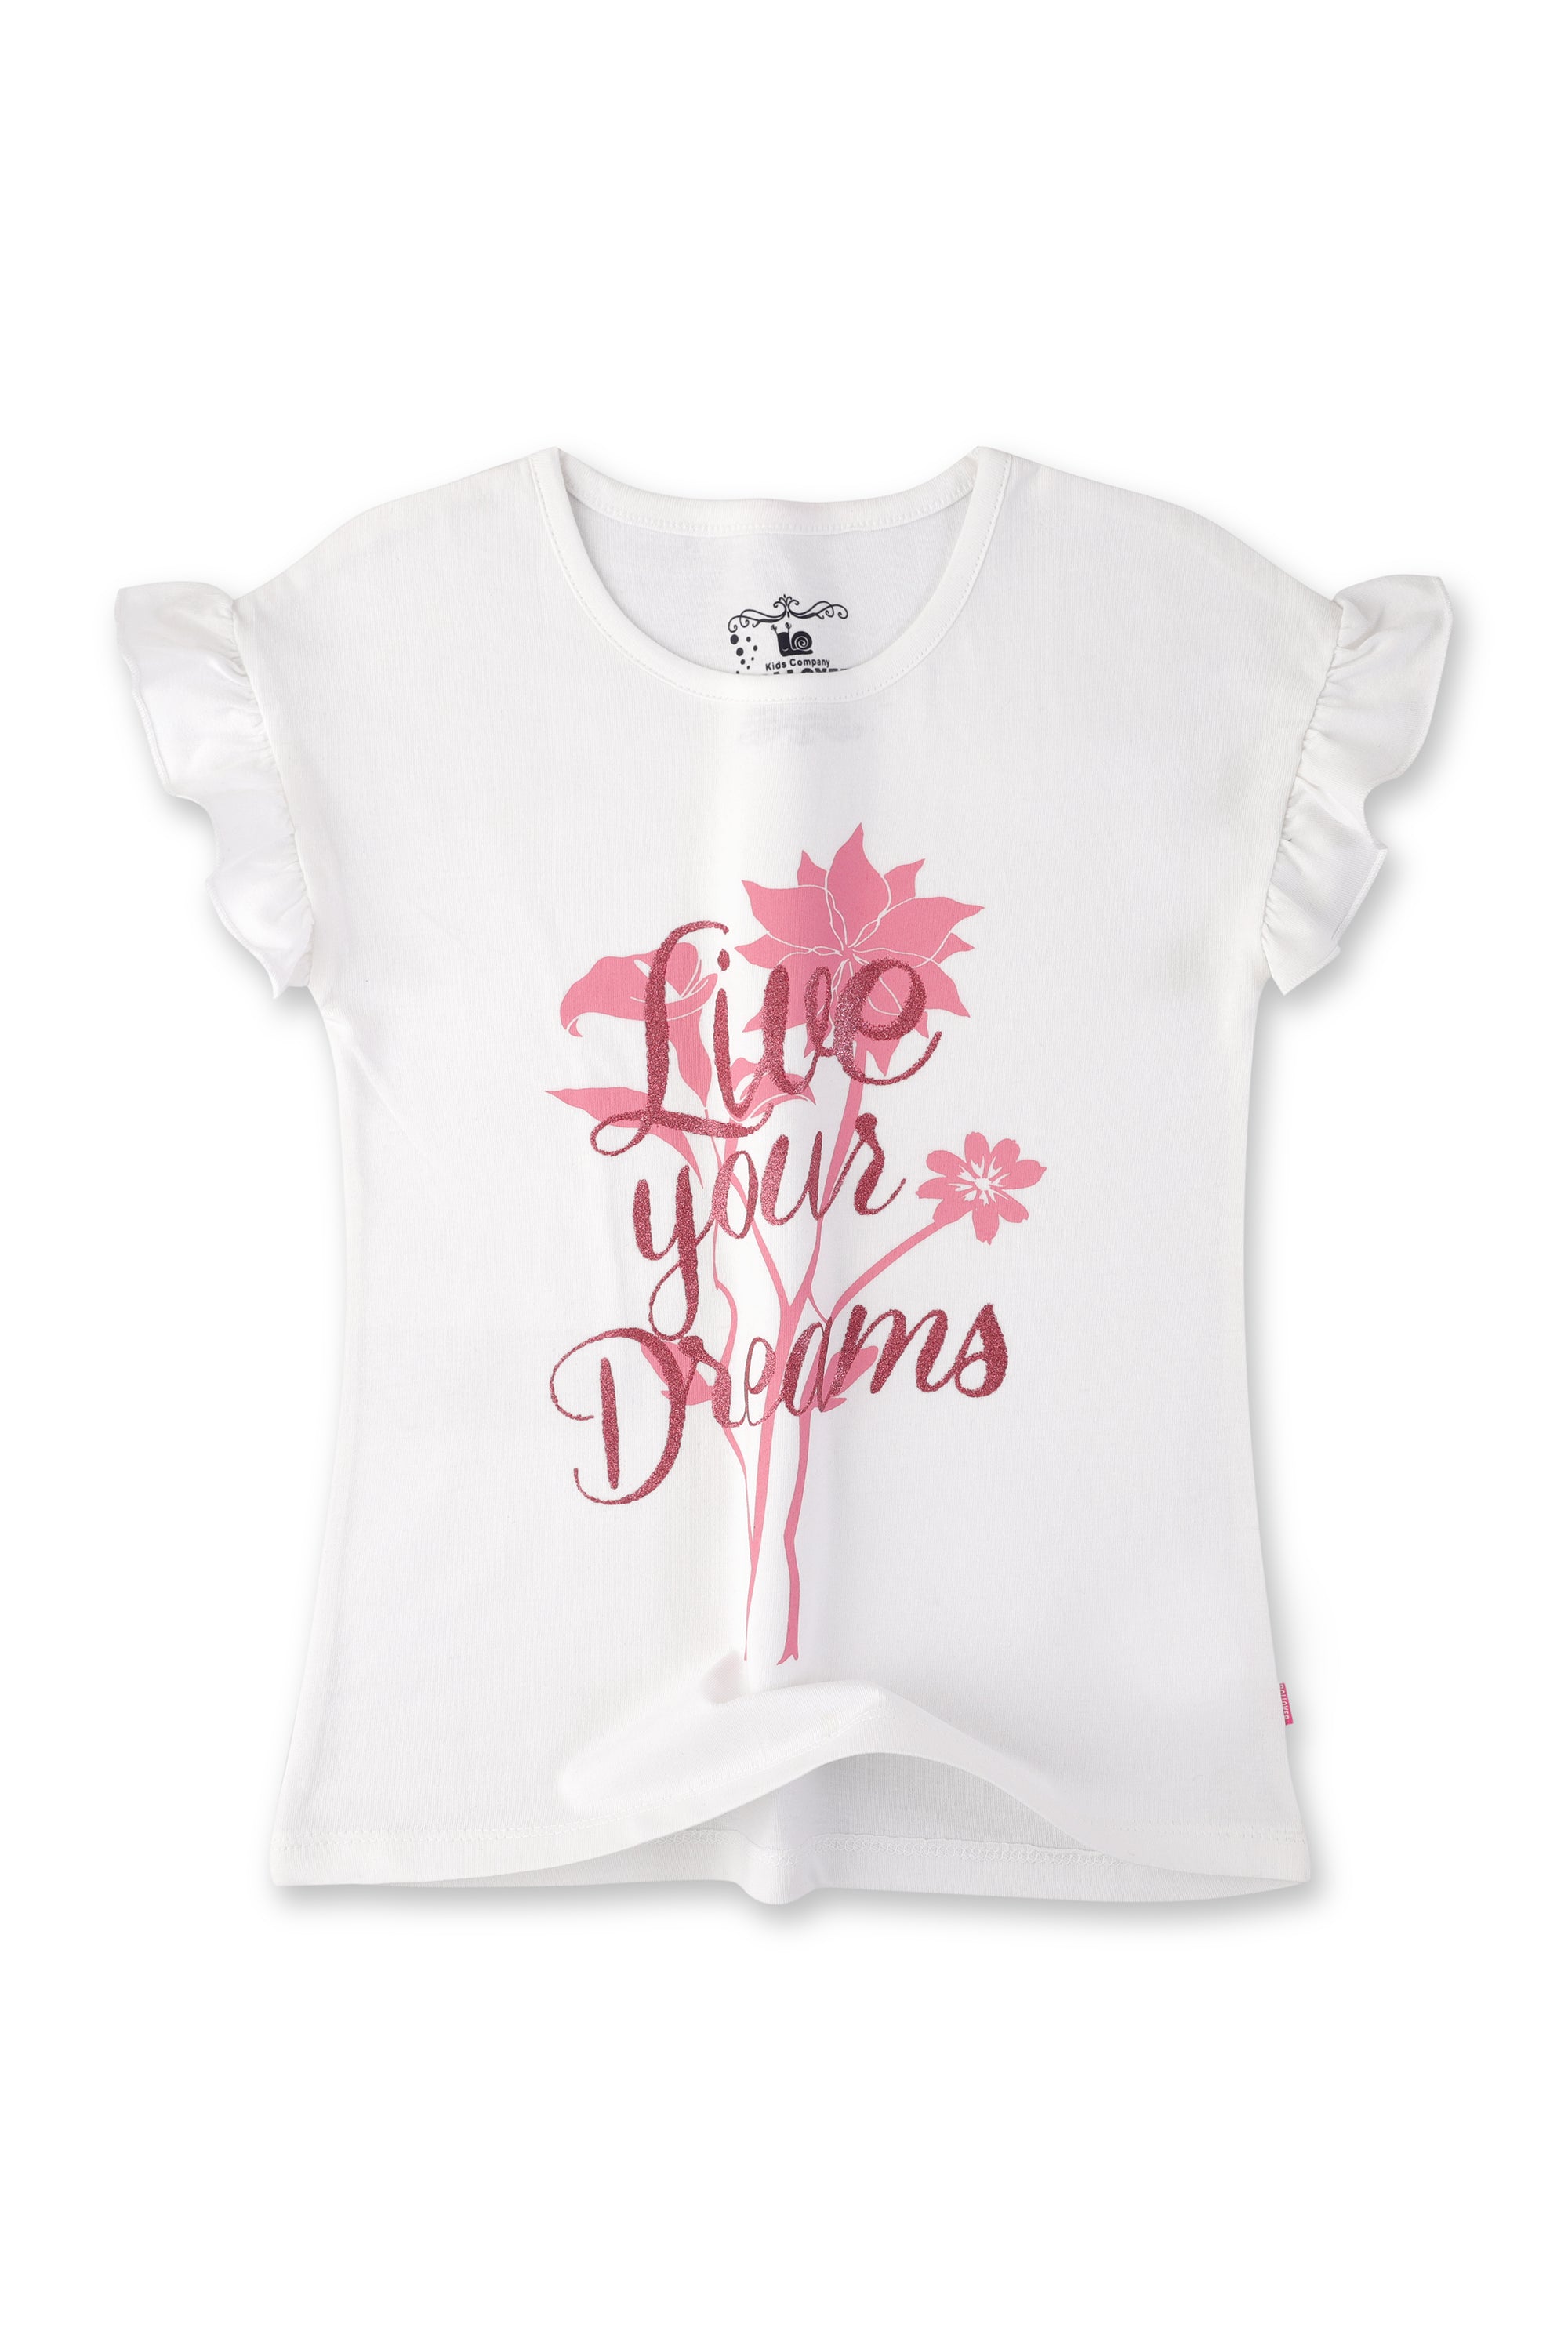 Live Your Dreams Girls Shirt